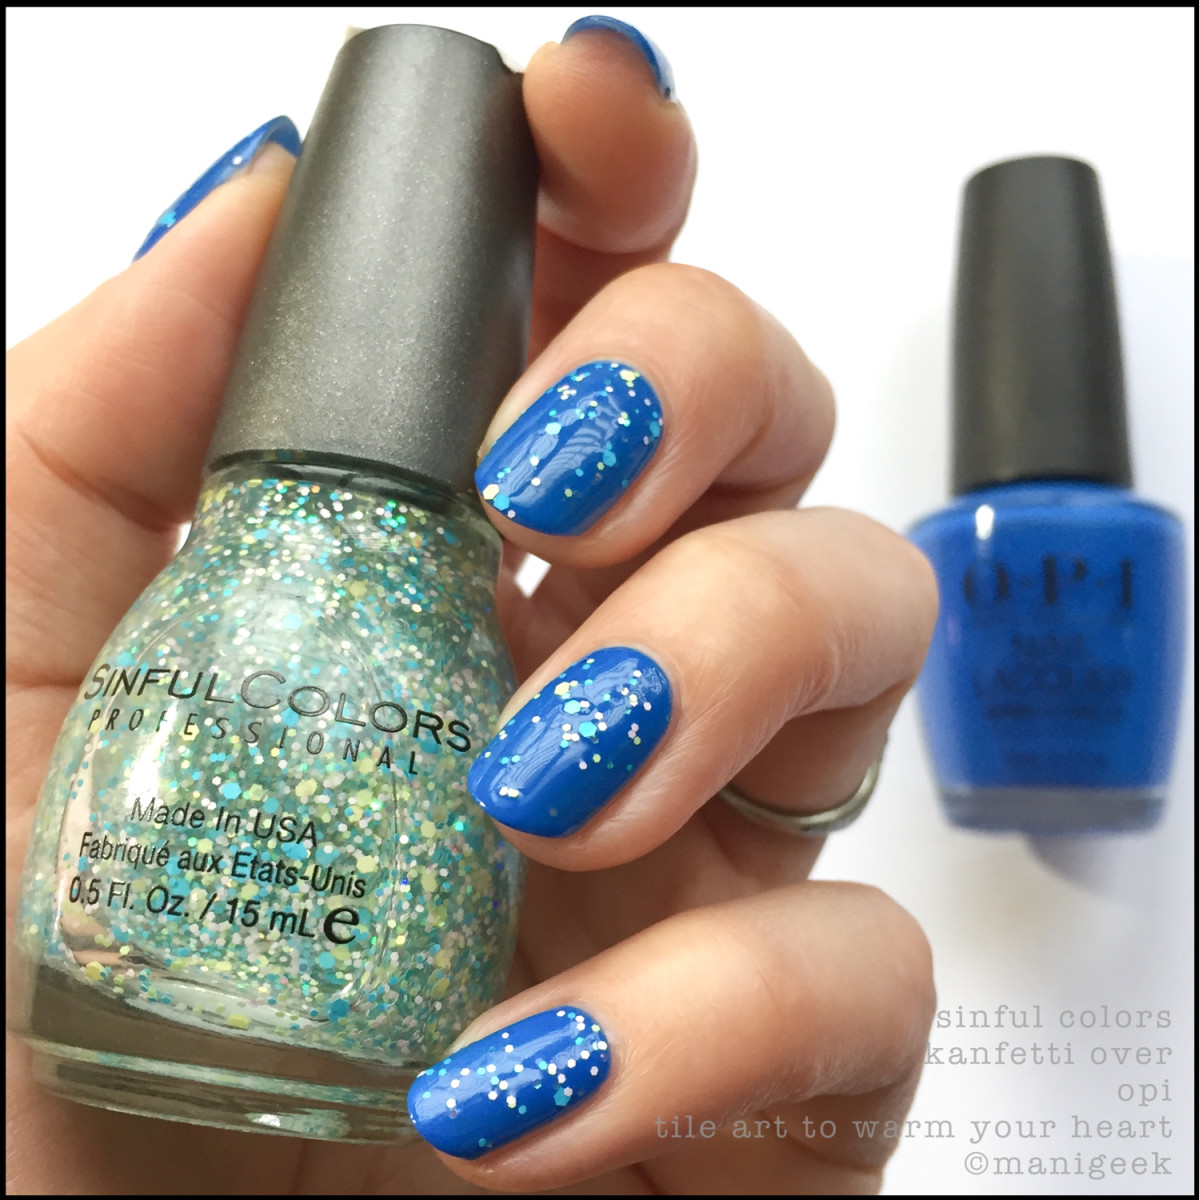 Sinful Colors Kanfetti over OPI Tile Art To Warm Your Heart _ Sinful Colors Swatches Archive Atrocity